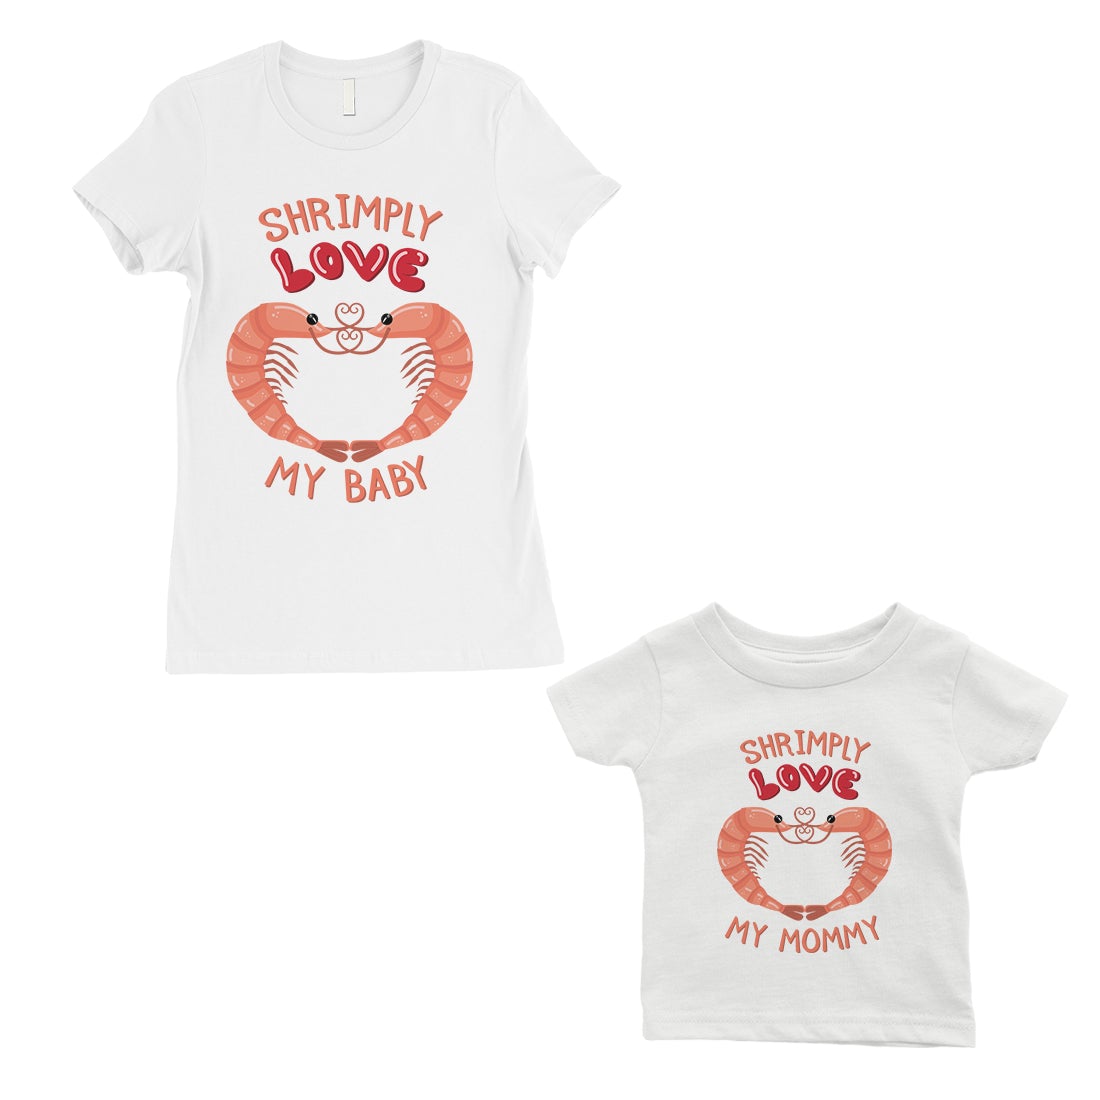 Shrimply Love Baby Mommy Mom and Baby Matching Gift Shirts White